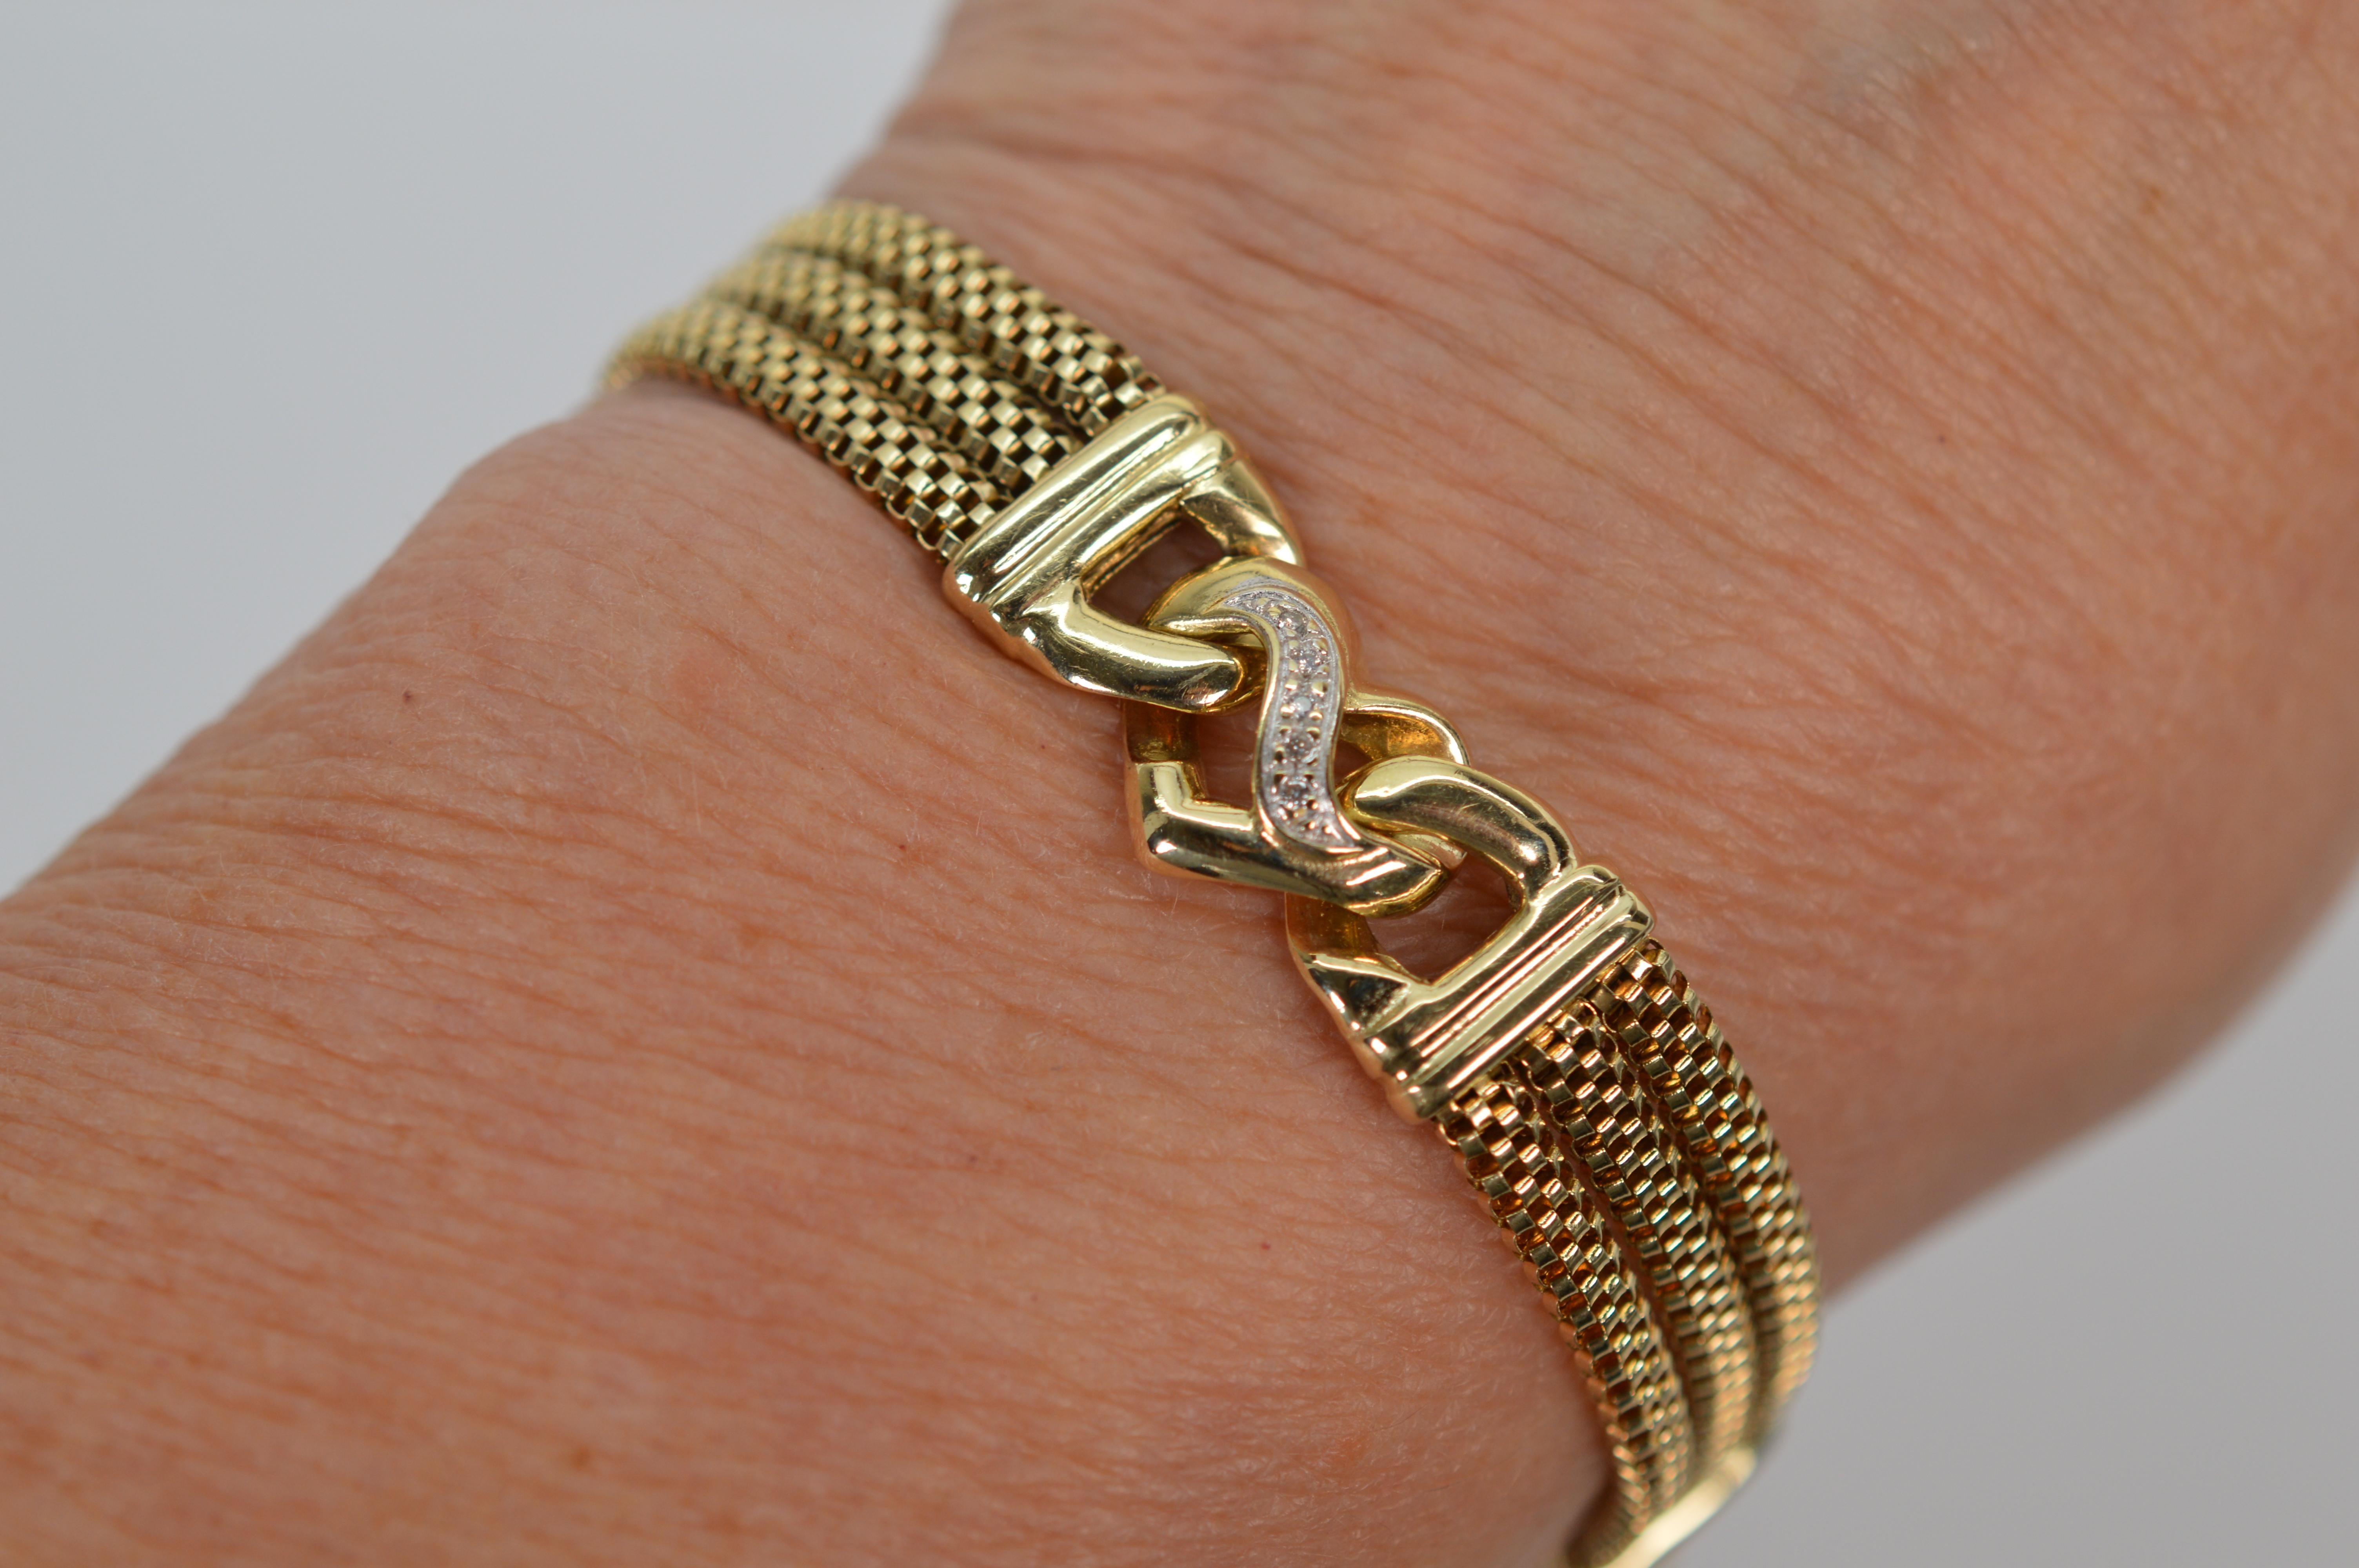 14 Karat Yellow Gold Mesh Chain Bracelet with Heart Station Diamond Accents In Good Condition For Sale In Mount Kisco, NY